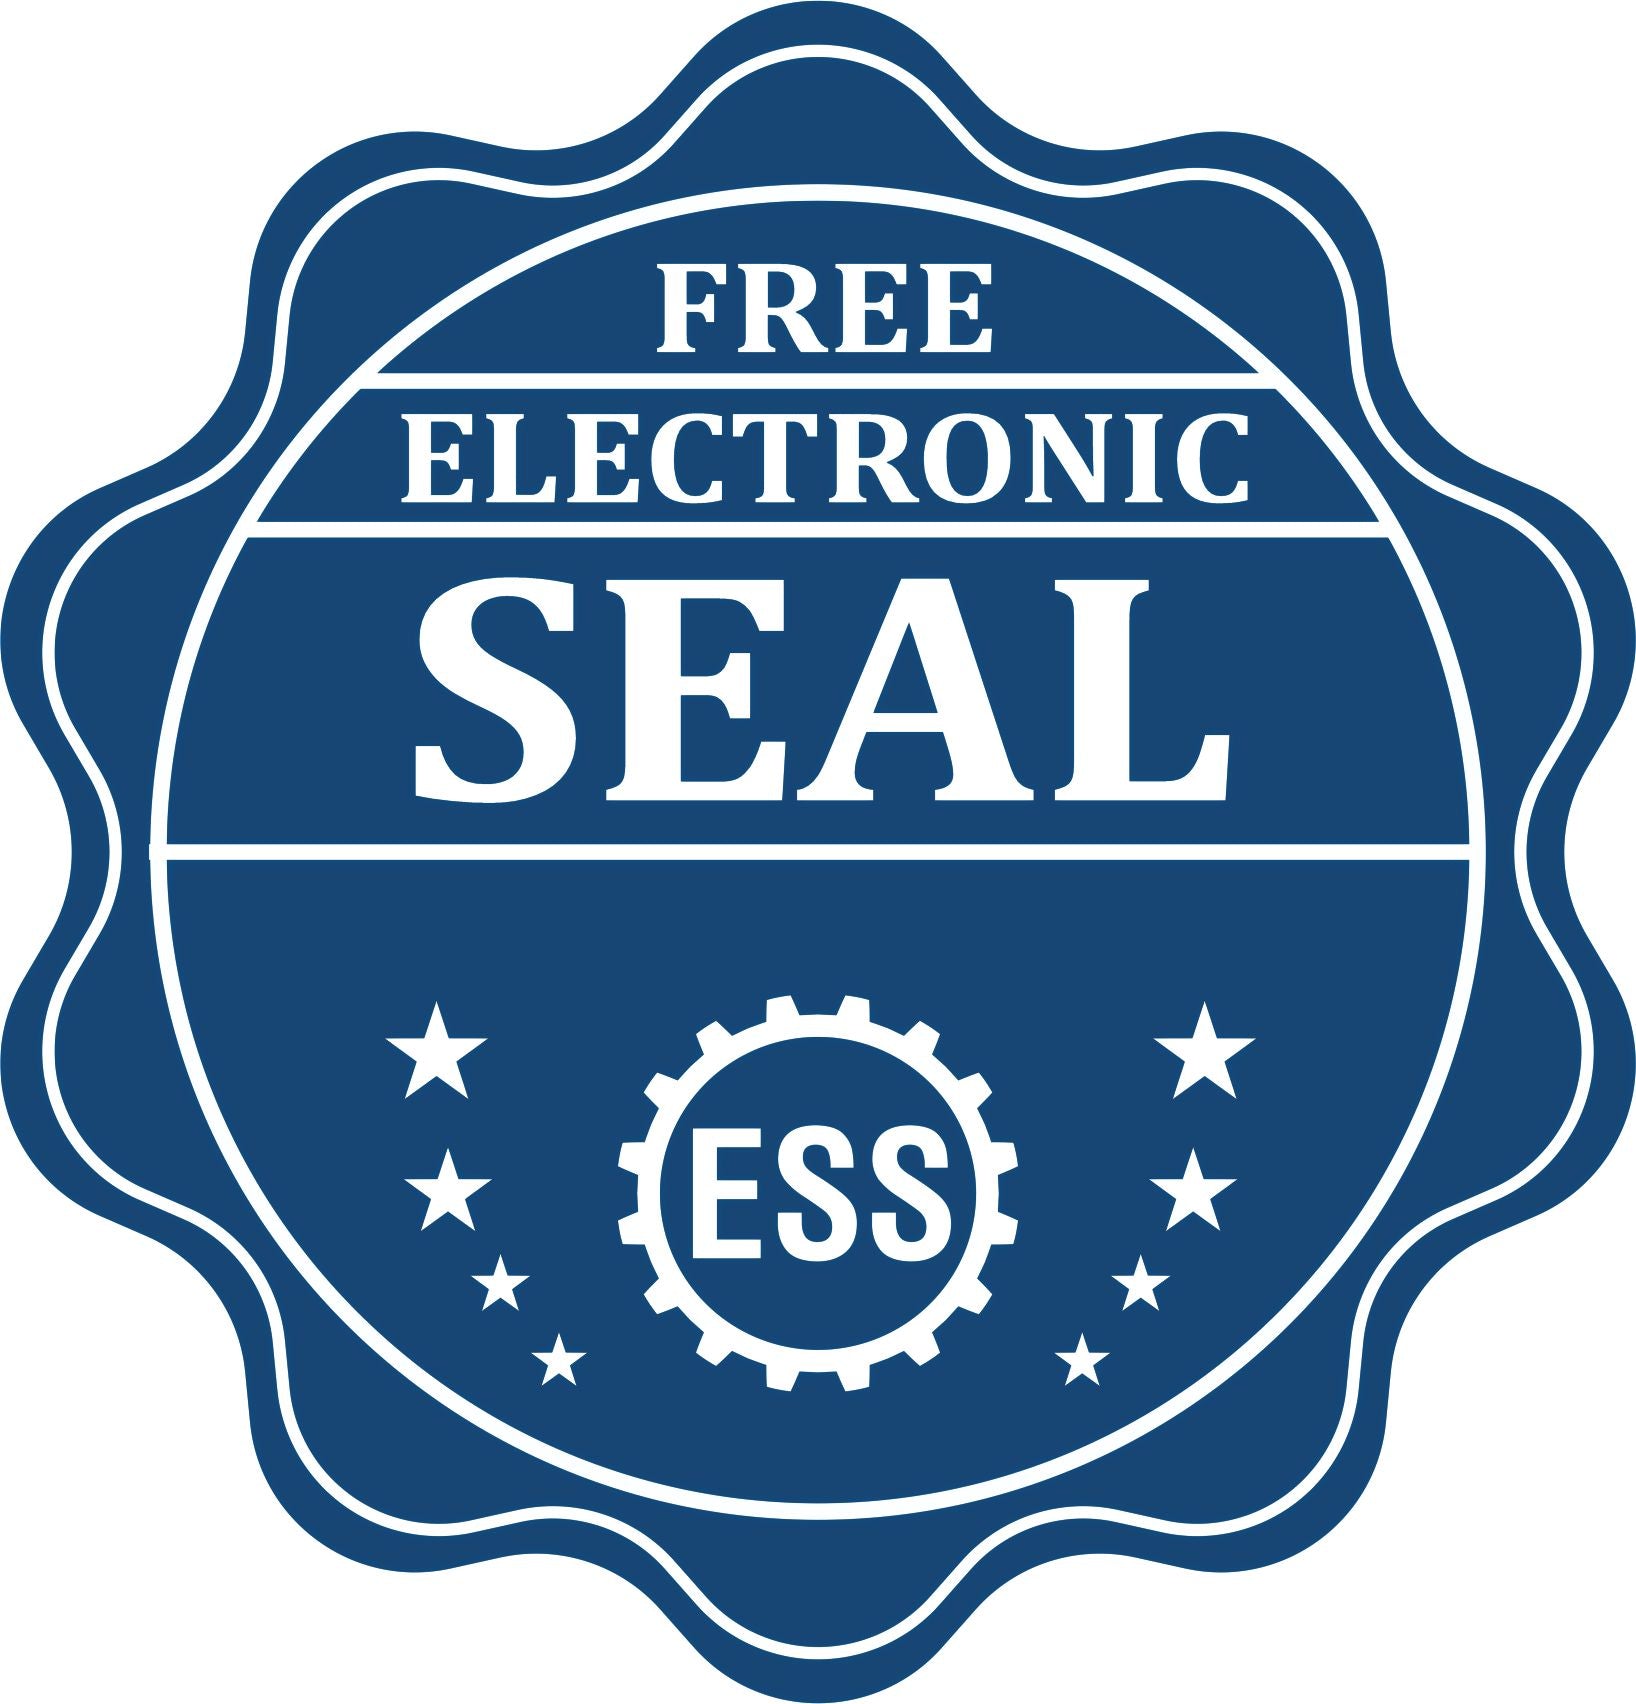 A badge showing a free electronic seal for the Handheld Kansas Professional Geologist Embosser with stars and the ESS gear on the emblem.